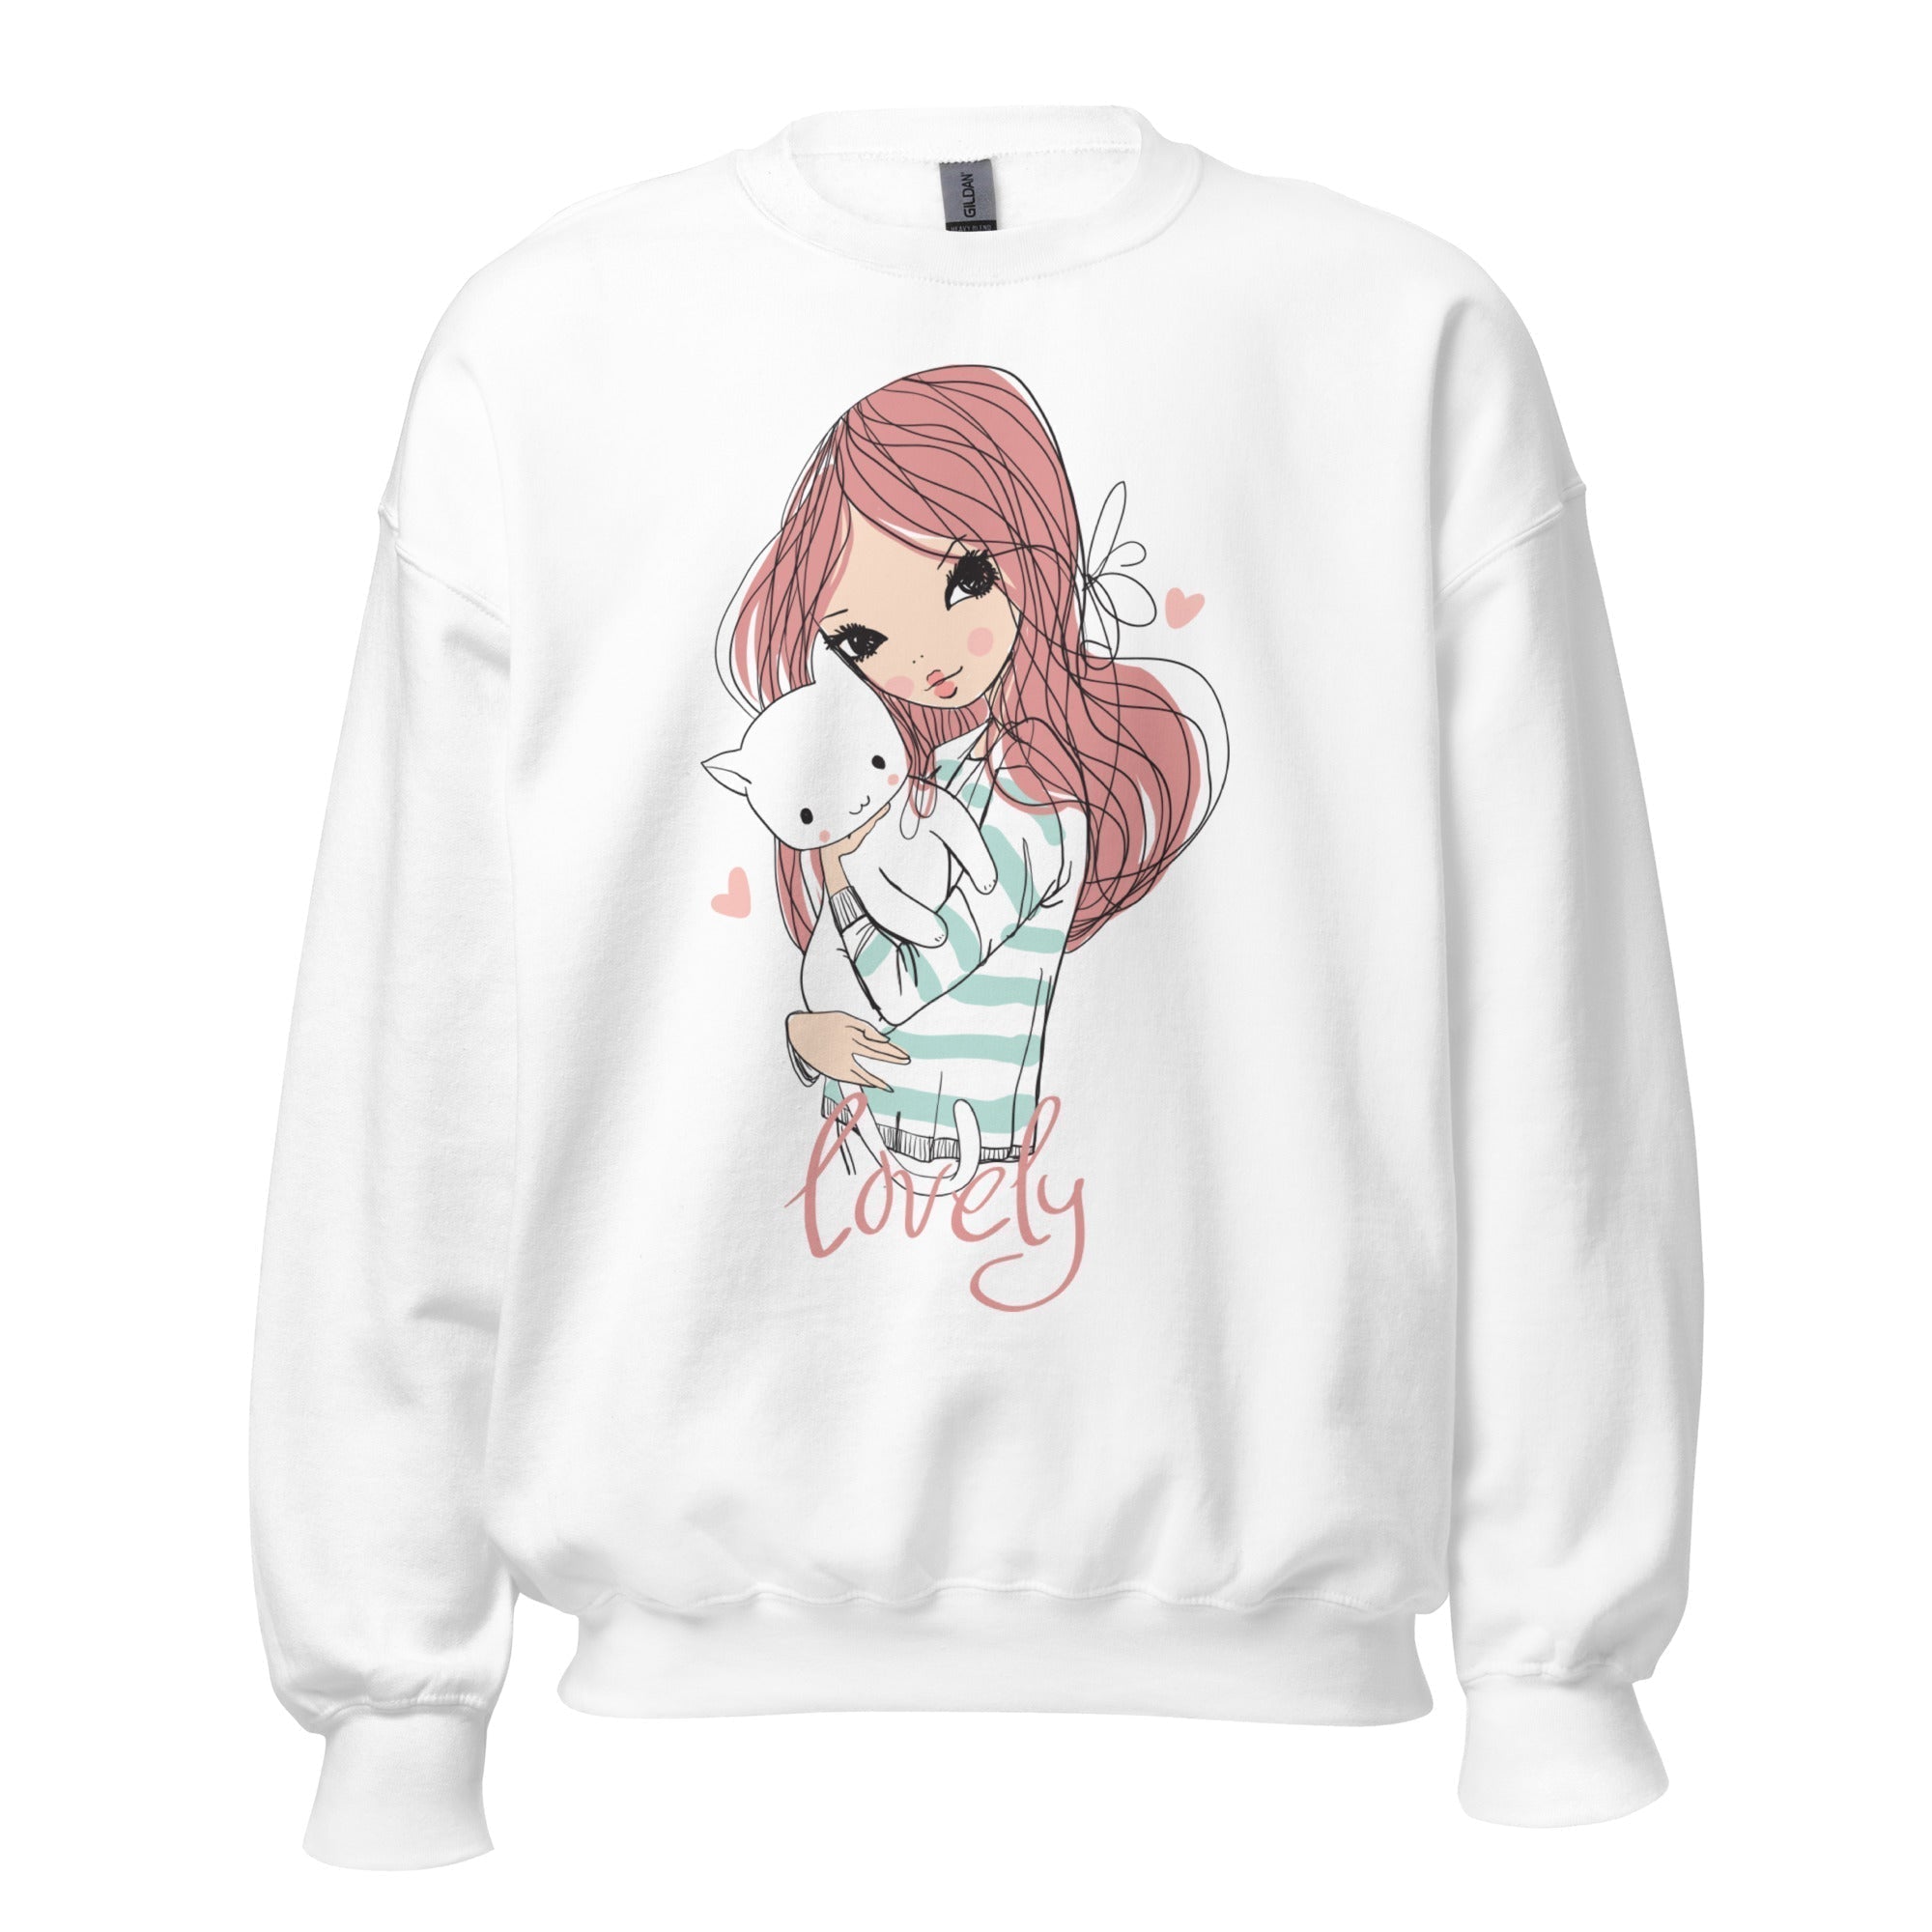 Women's Crew Neck Sweatshirt - Lovely Girl With Cat - GRAPHIC T-SHIRTS